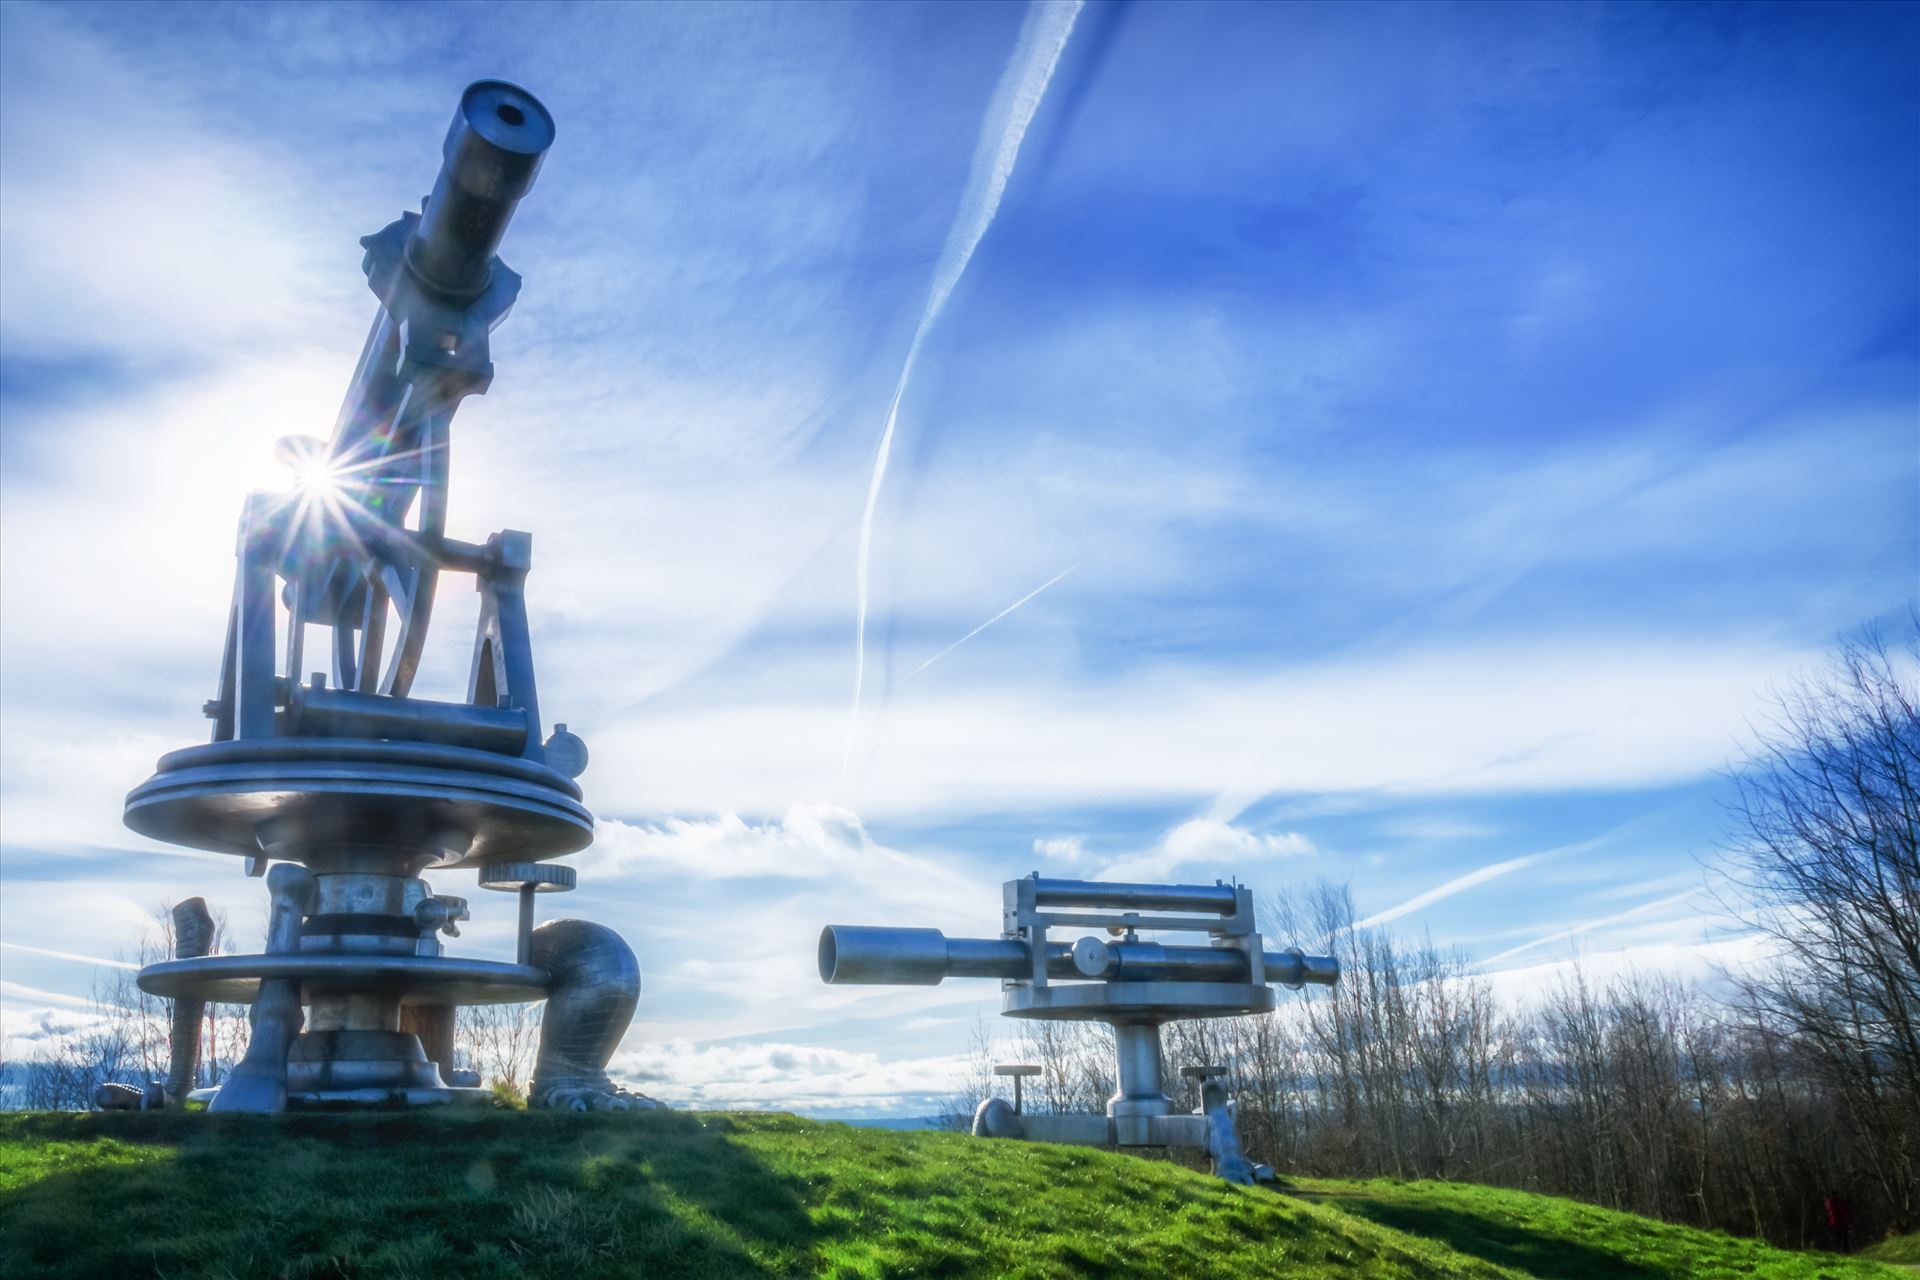 Terris Novalis Situated on the coast to coast cycle route, the amazing stainless steel sculptures by Turner Prize winning artist Tony Cragg dominate the landscape above the old Consett Steelworks site. by philreay